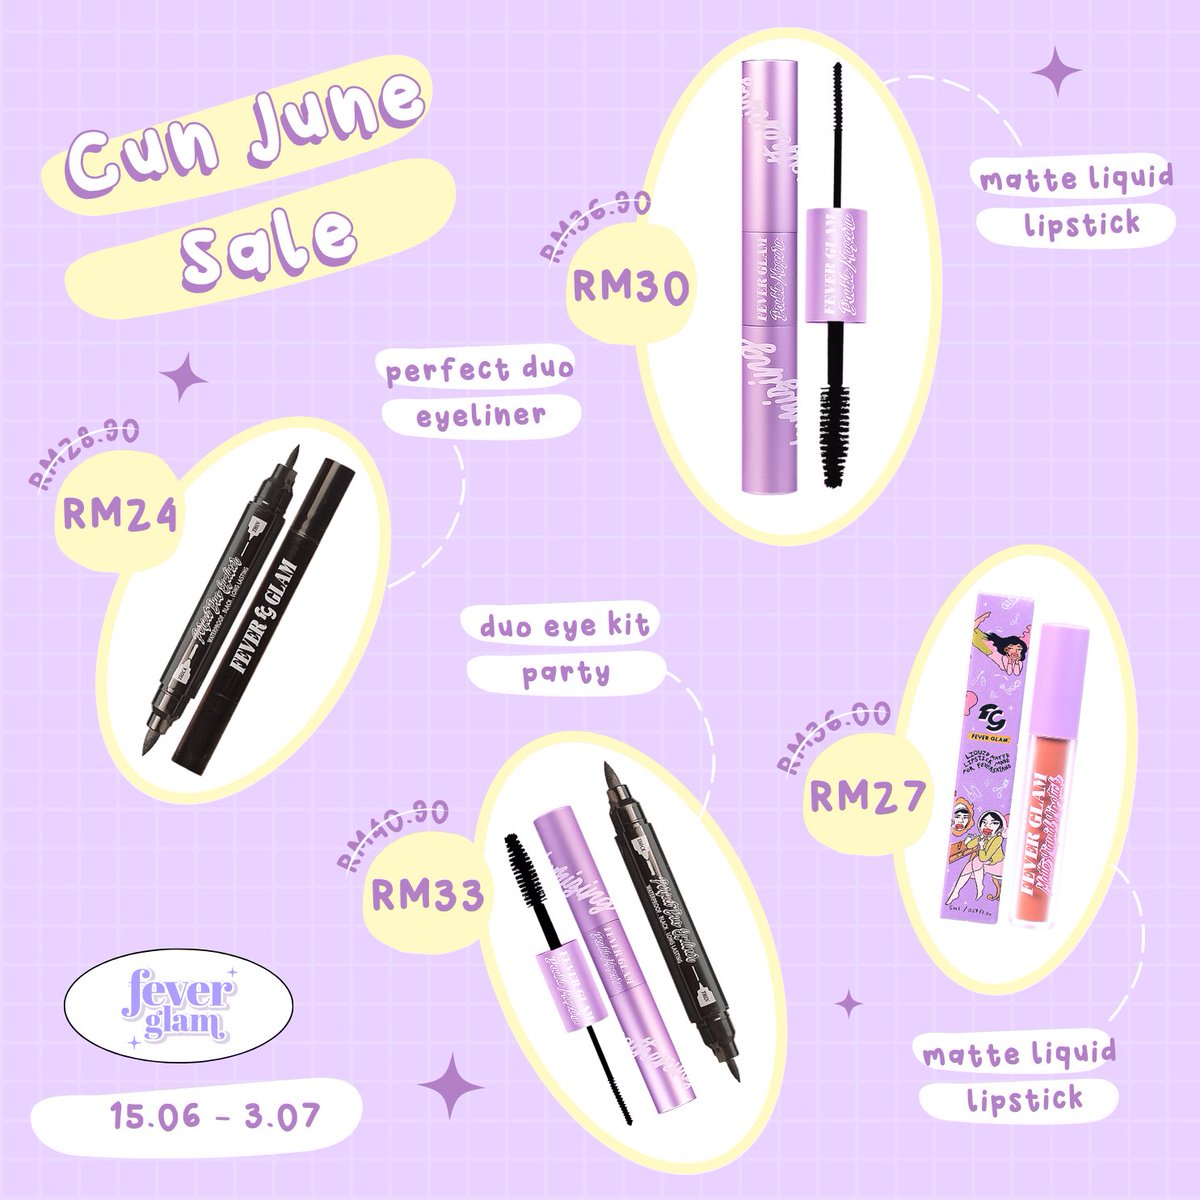 Cun June Sale with @FeverGlam_ 💜

Time to restock your favourite ladies!
🛒 linktr.ee/byanasoha.co